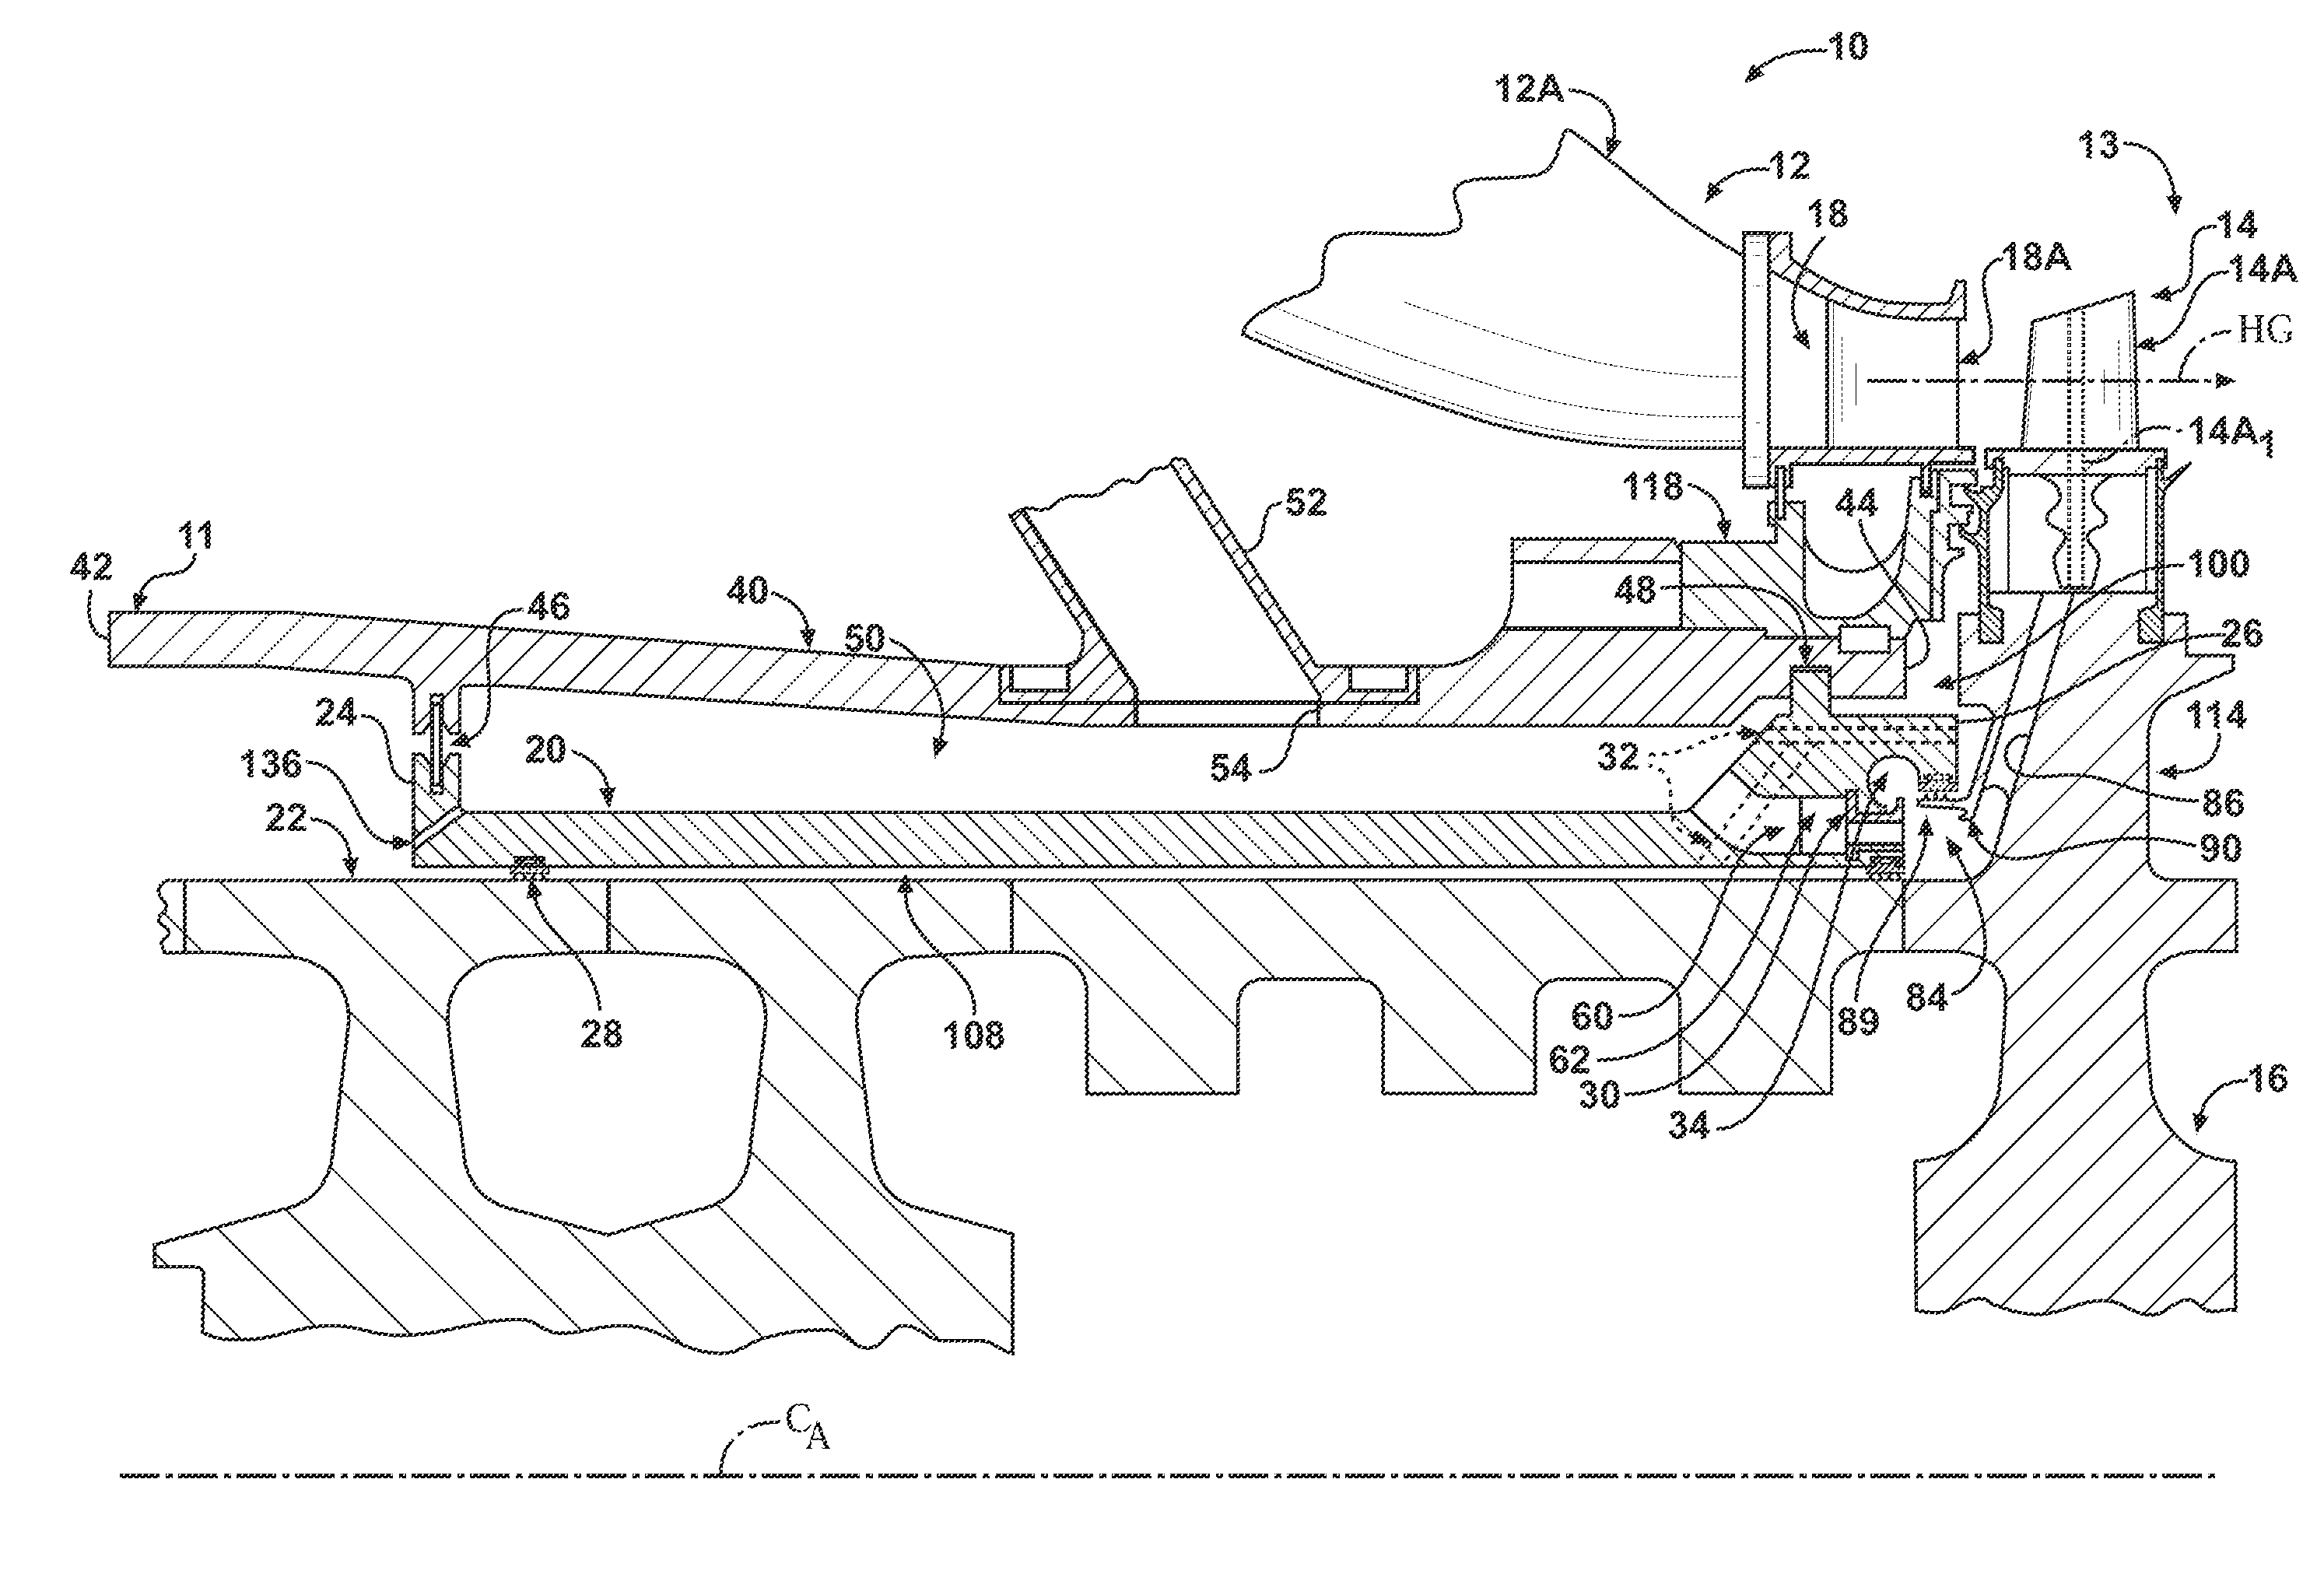 Radial pre-swirl assembly and cooling fluid metering structure for a gas turbine engine